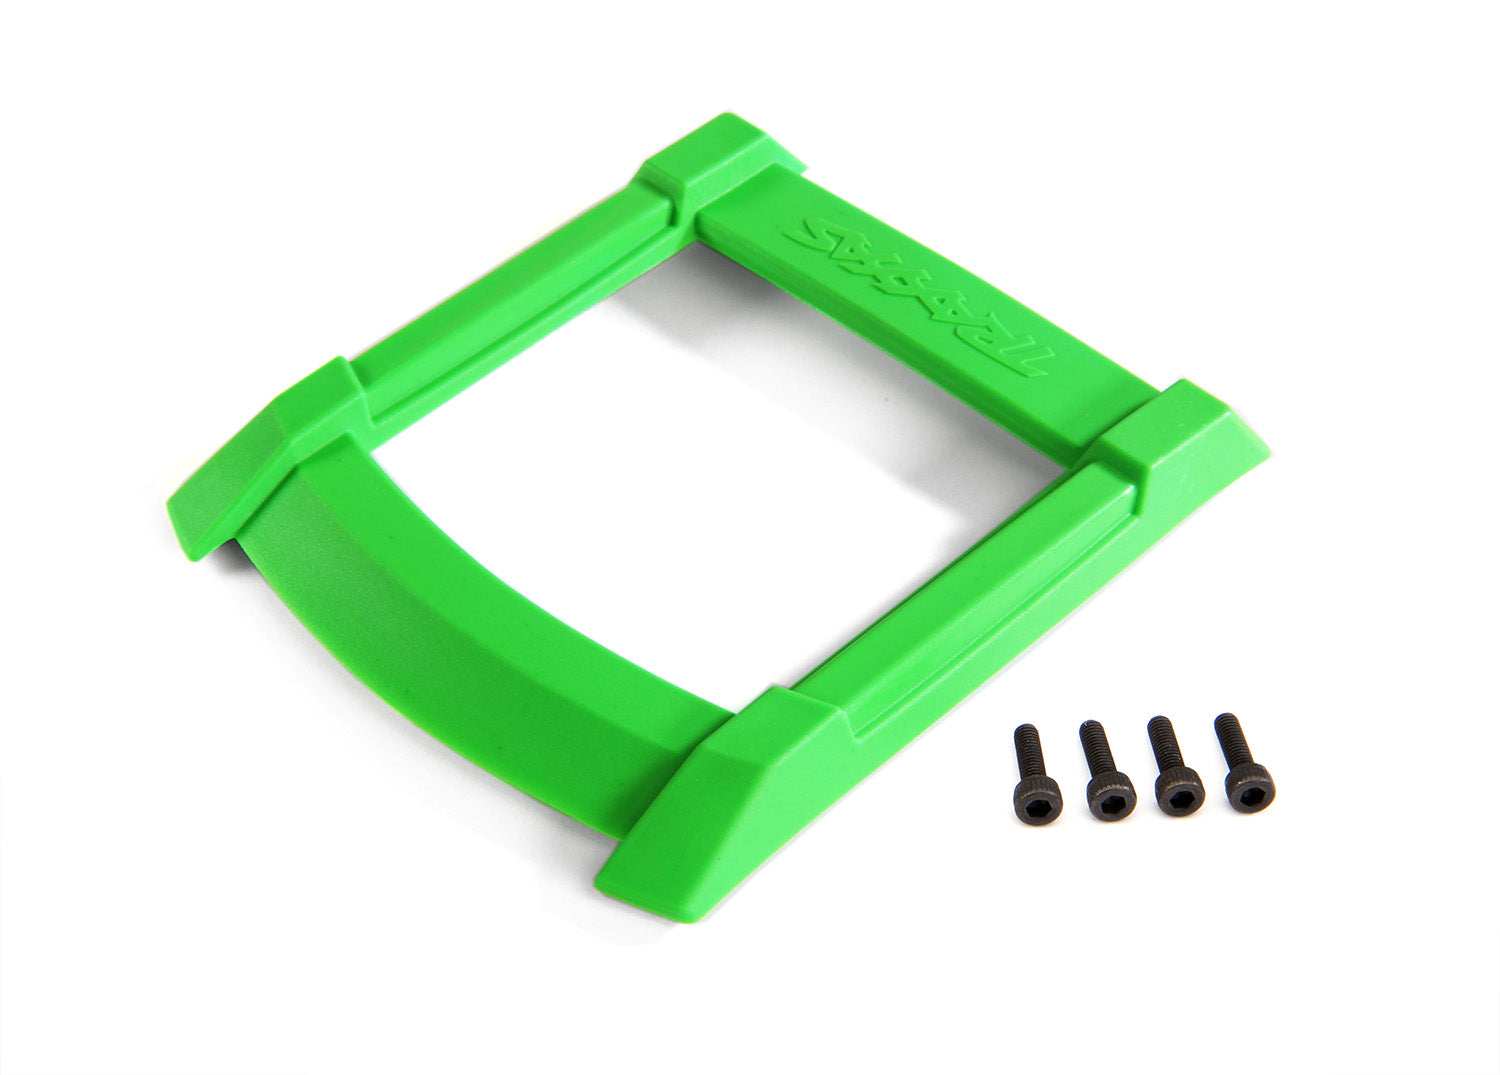 Traxxas Maxx Roof Body Skid Plate (Assorted Colors)